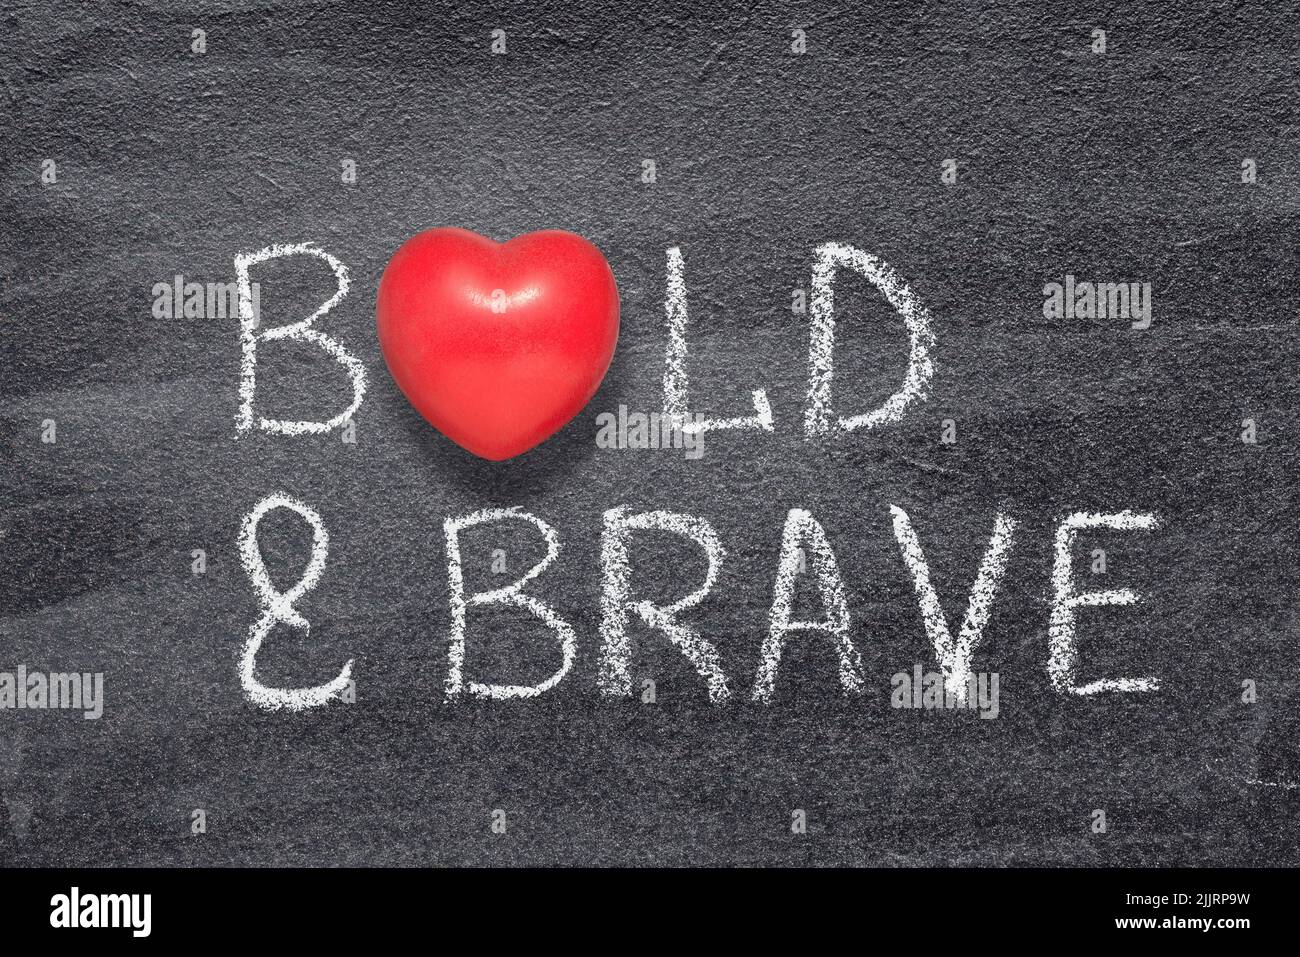 bold and brave phrase written on chalkboard with red heart symbol Stock Photo